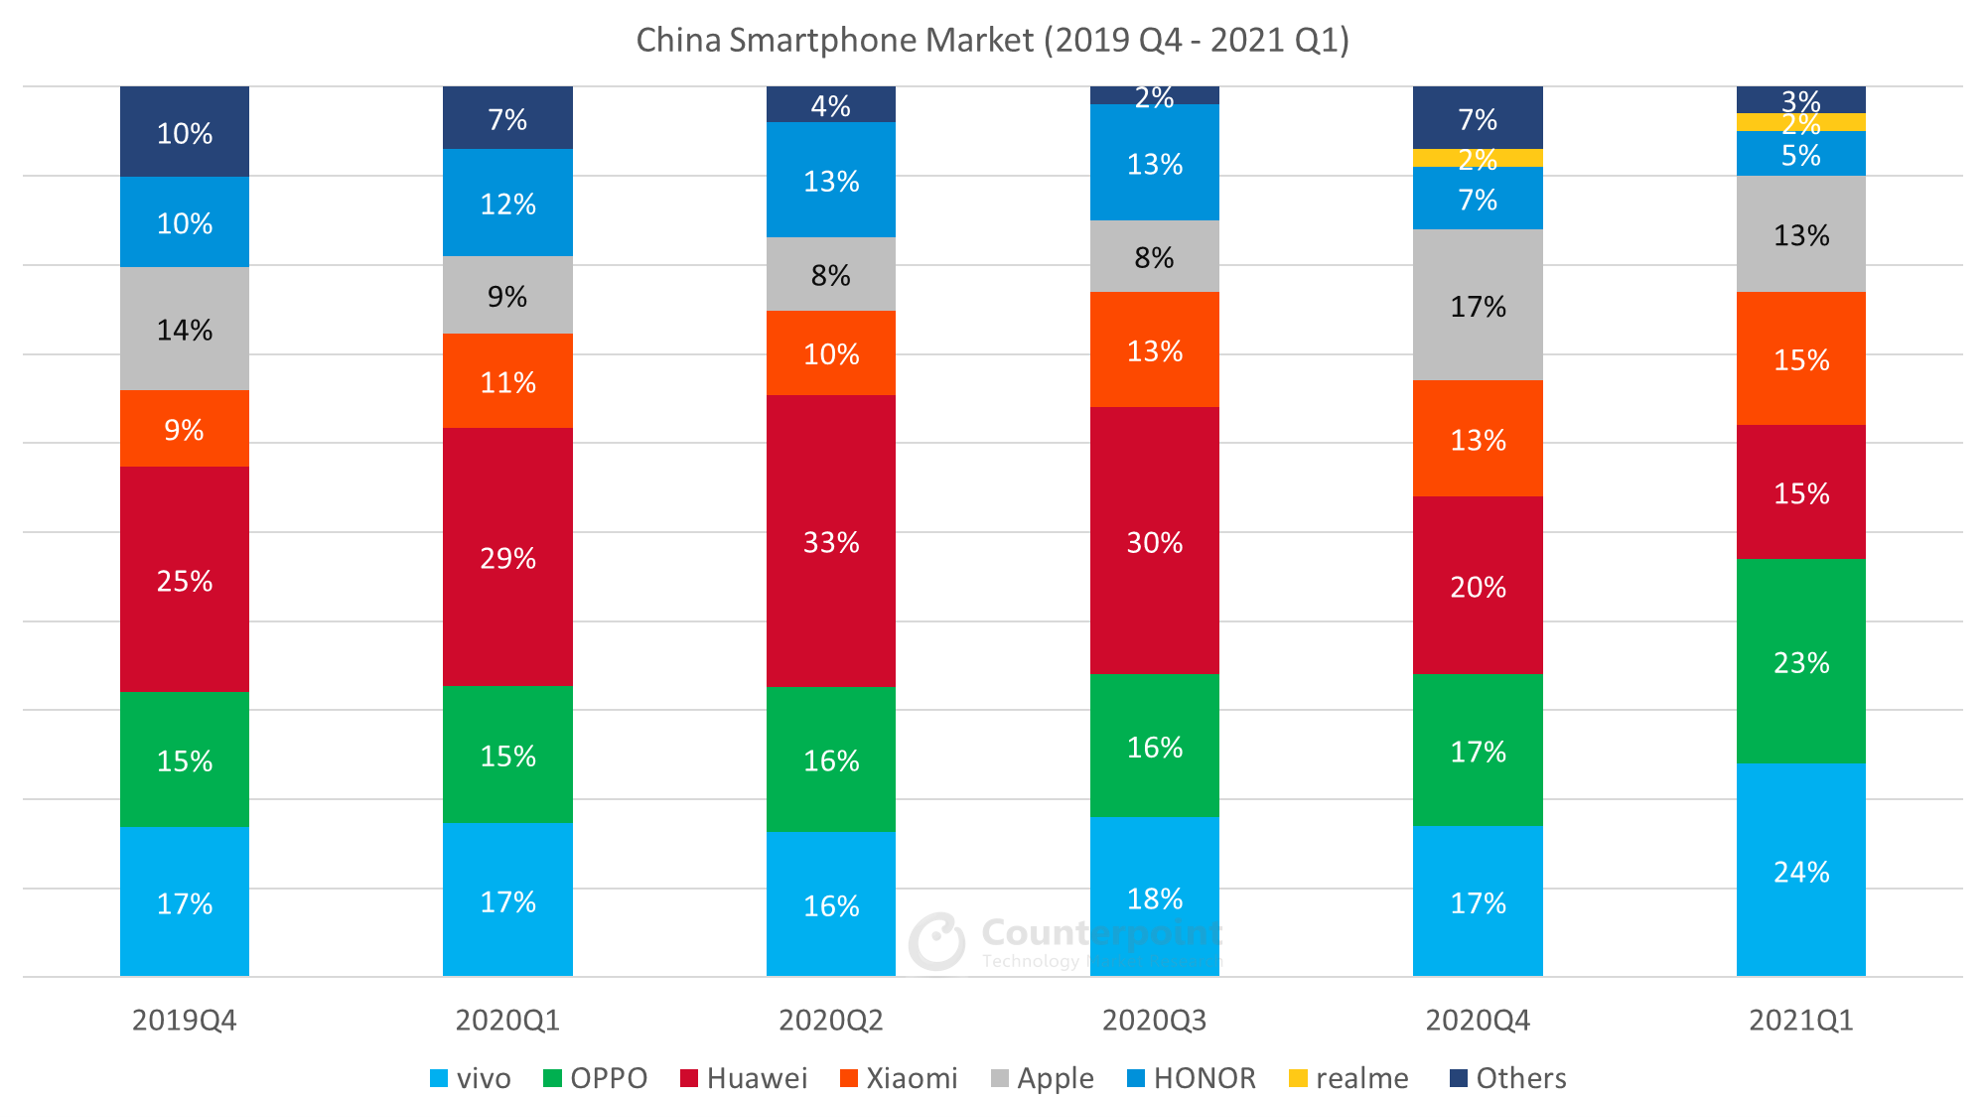 Counterpoint-Research-China-Smartphone-Quarterly-Market-Data-Q4-2019-Q1-2021